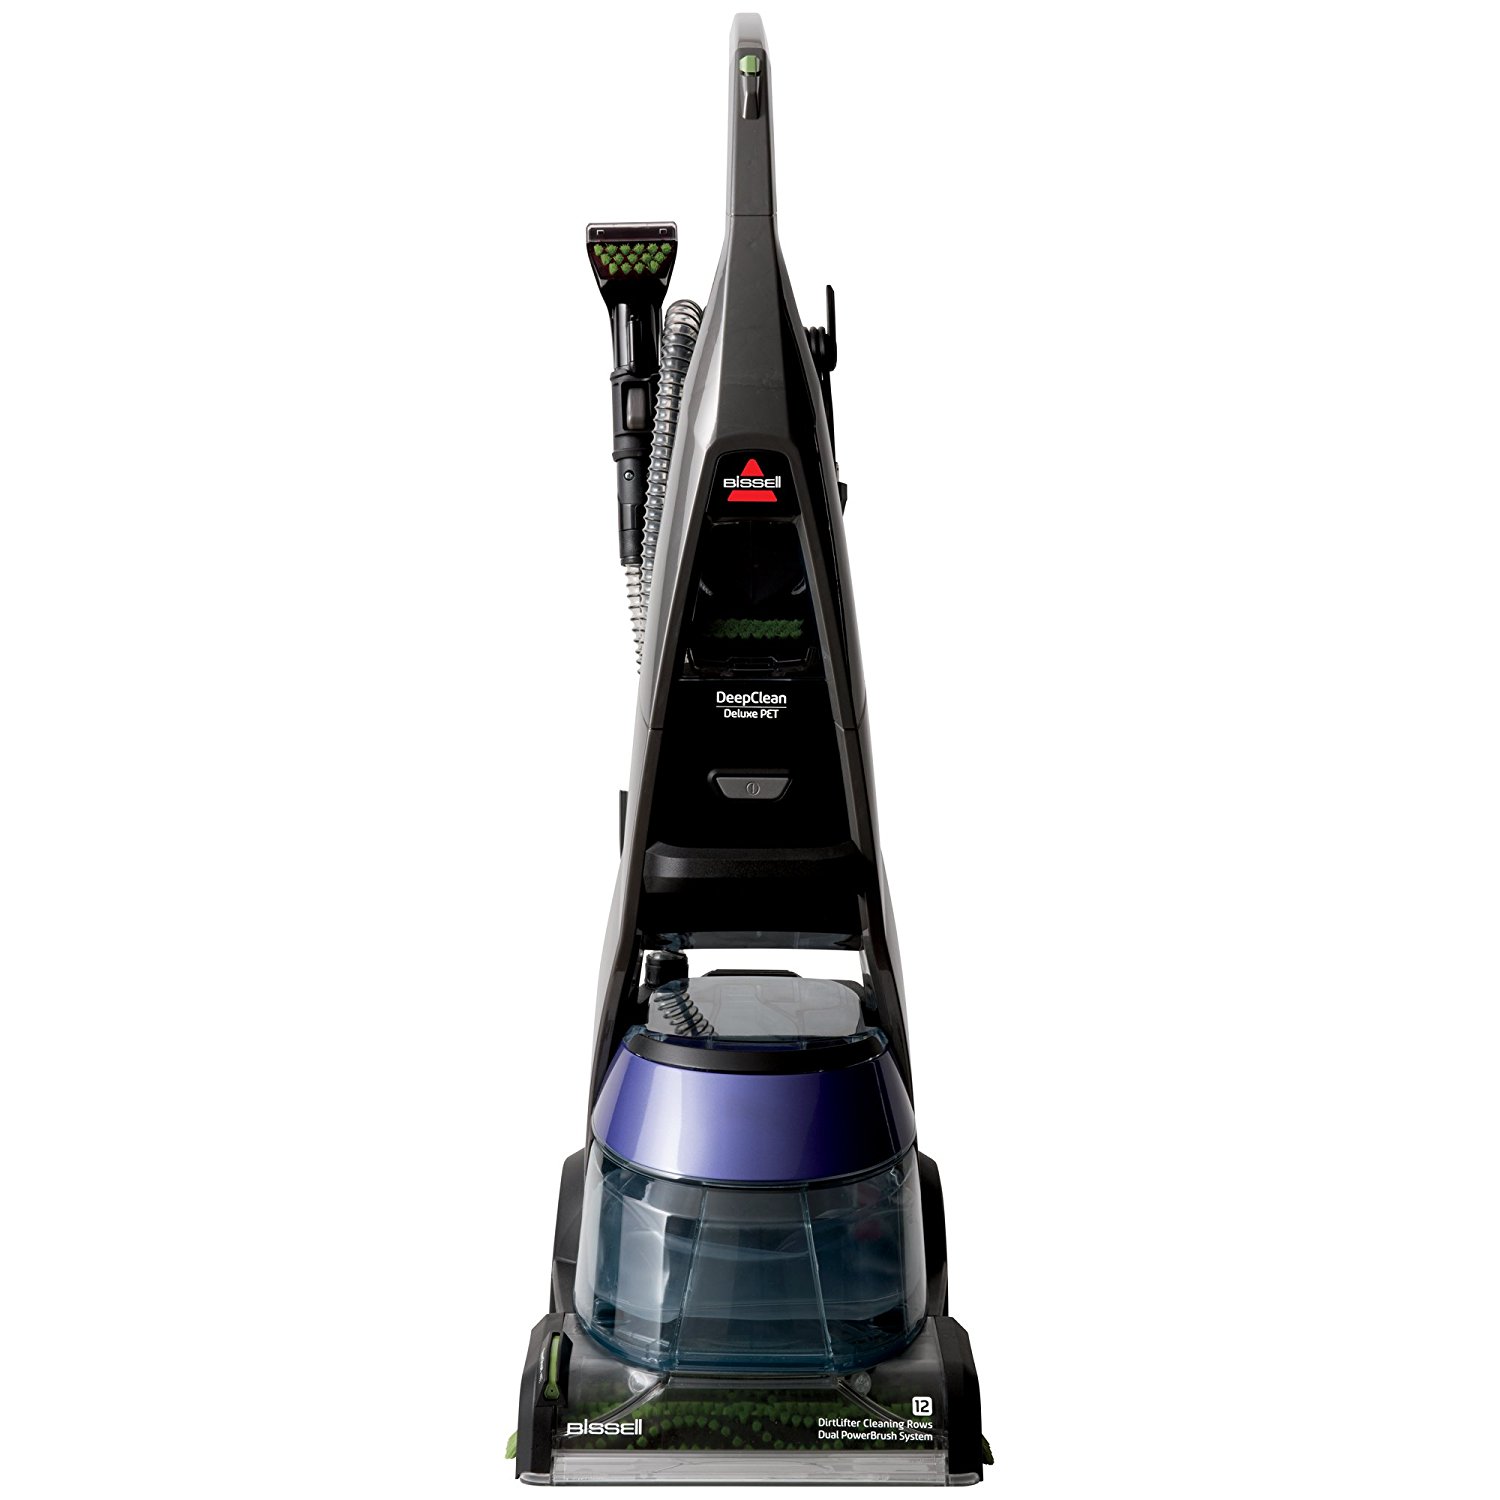 Bissell 36Z9 DeepClean Deluxe Pet Full Size Upright Carpet Cleaner and Shampooer - image 1 of 11